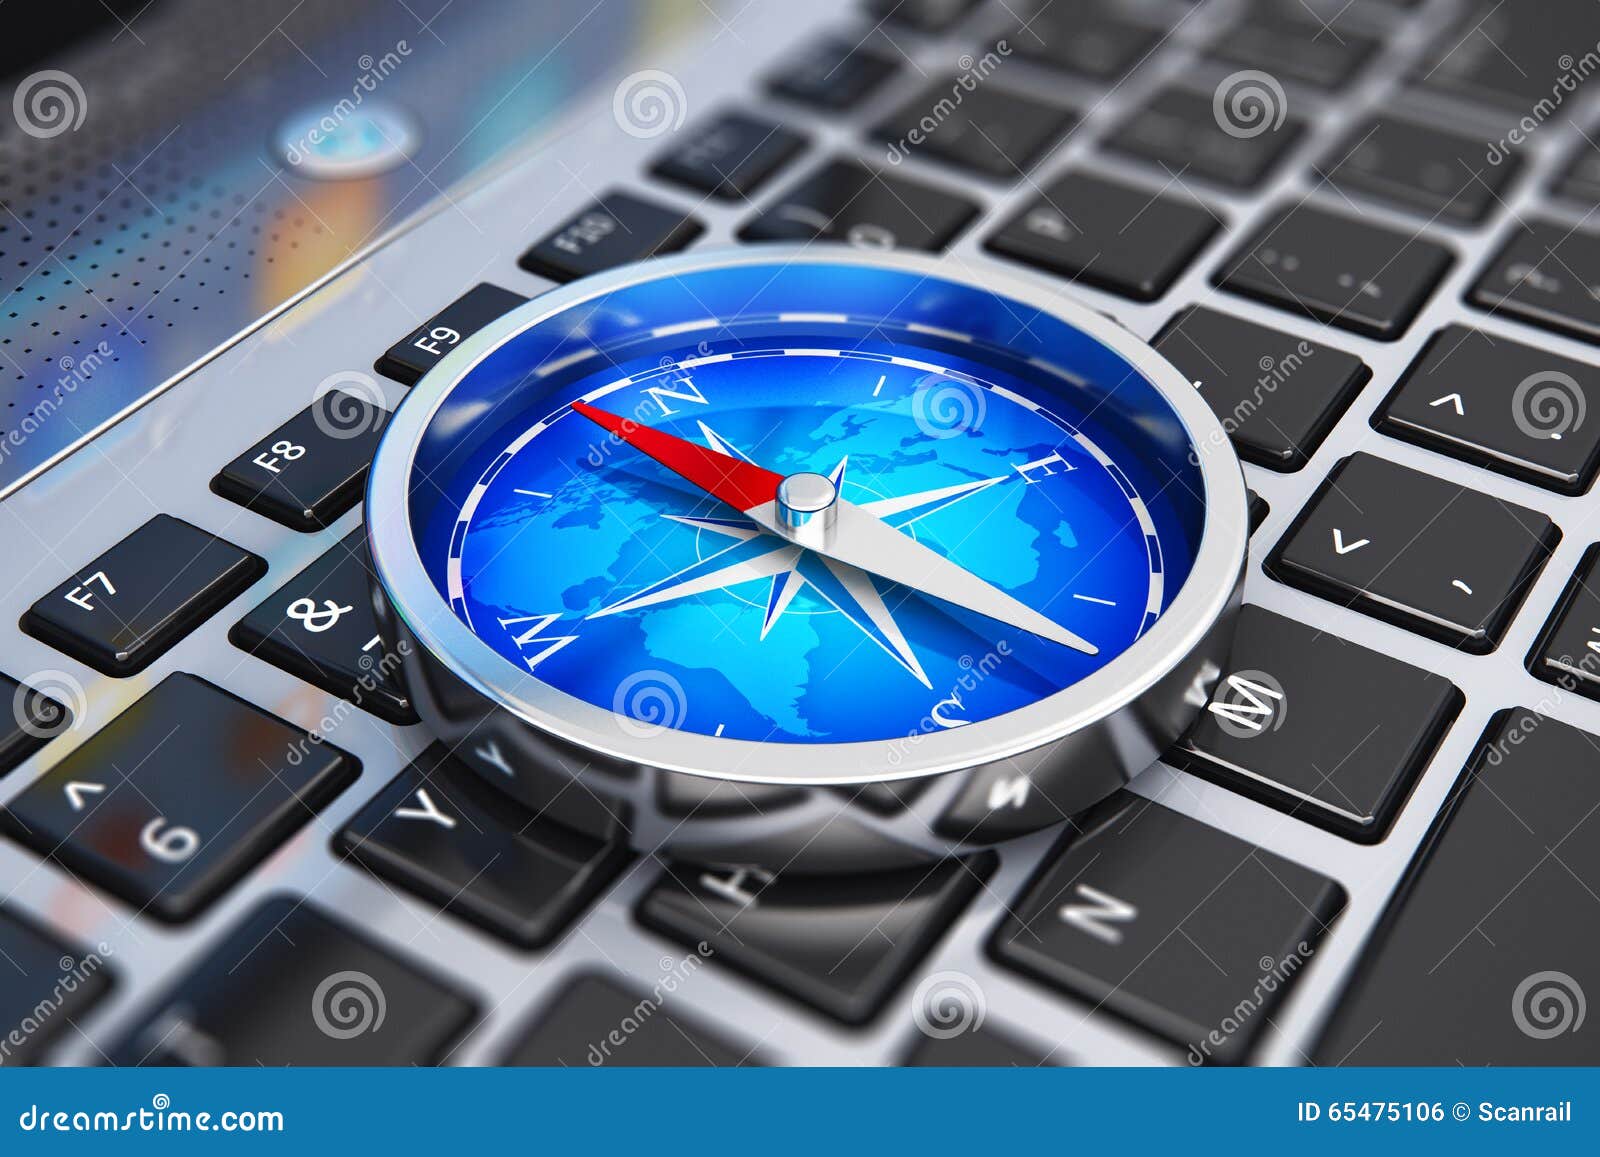 Modern Wireless Keyboard Isolated On Transparent Background. Top View  Royalty Free SVG, Cliparts, Vectors, and Stock Illustration. Image  144059131.